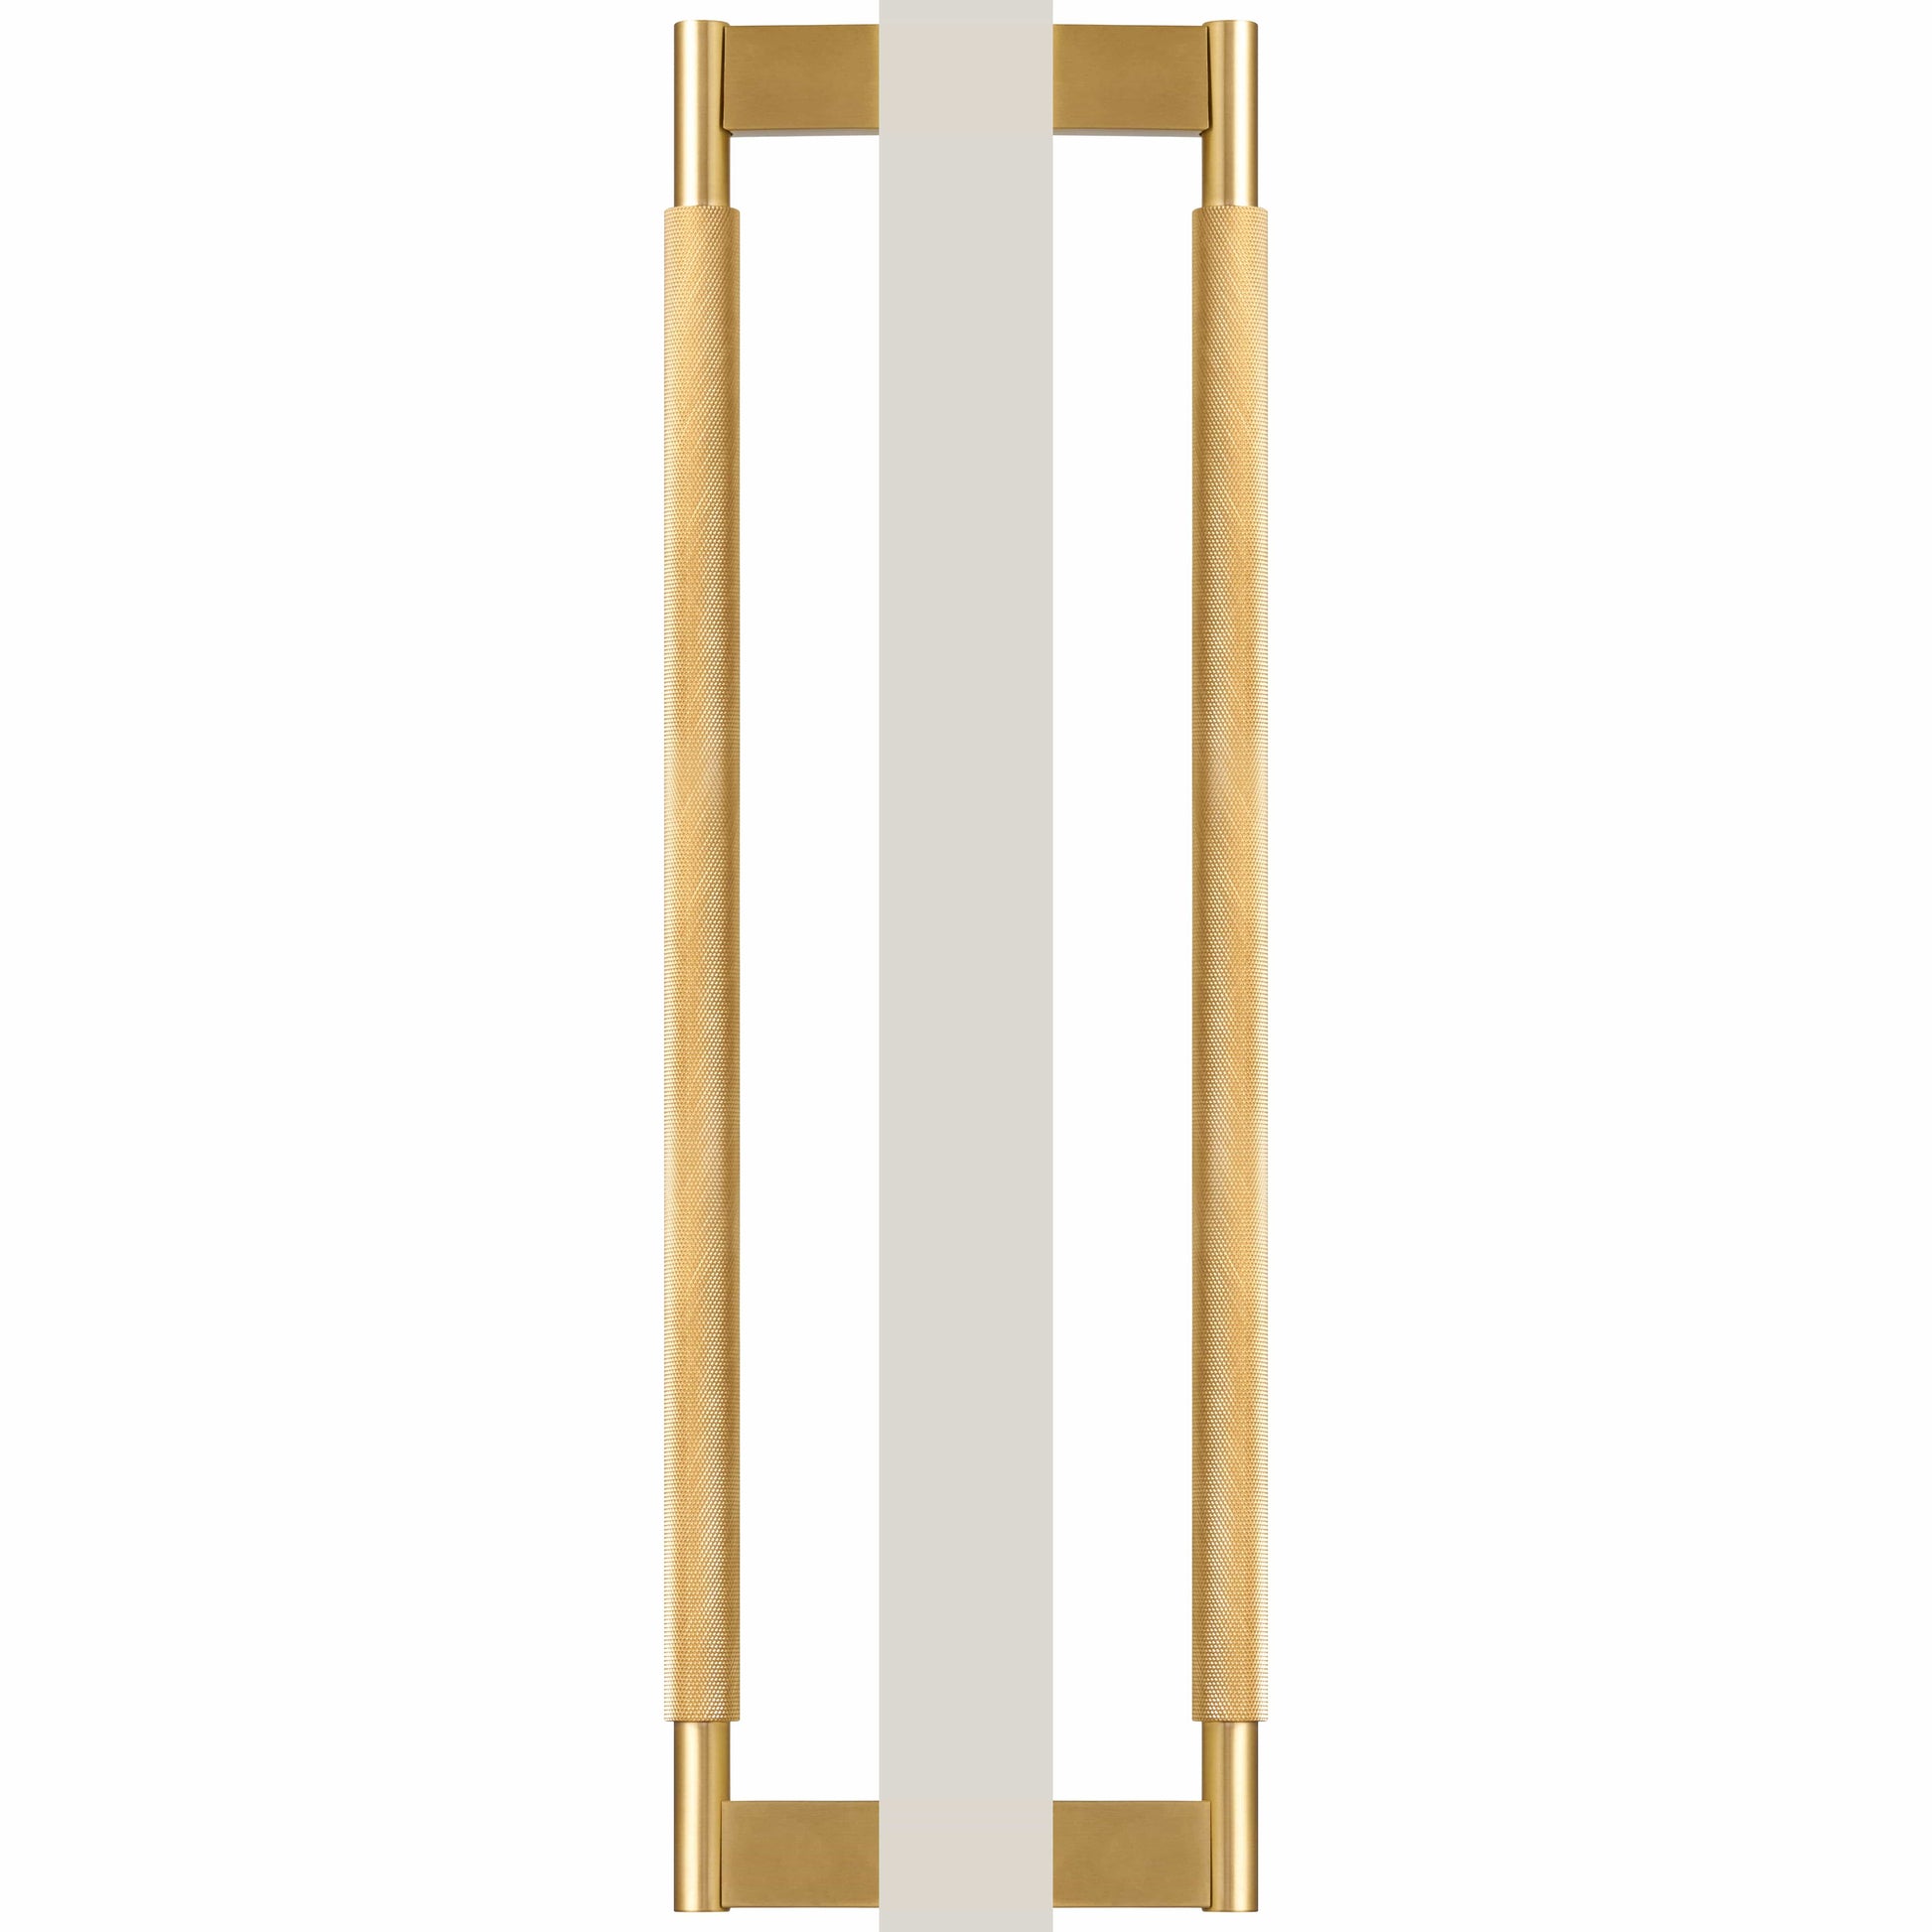 Bayside Luxe - Double Sided Solid Satin Brass Door Pull  - Bronte 450 x 55mm (HS418mm)